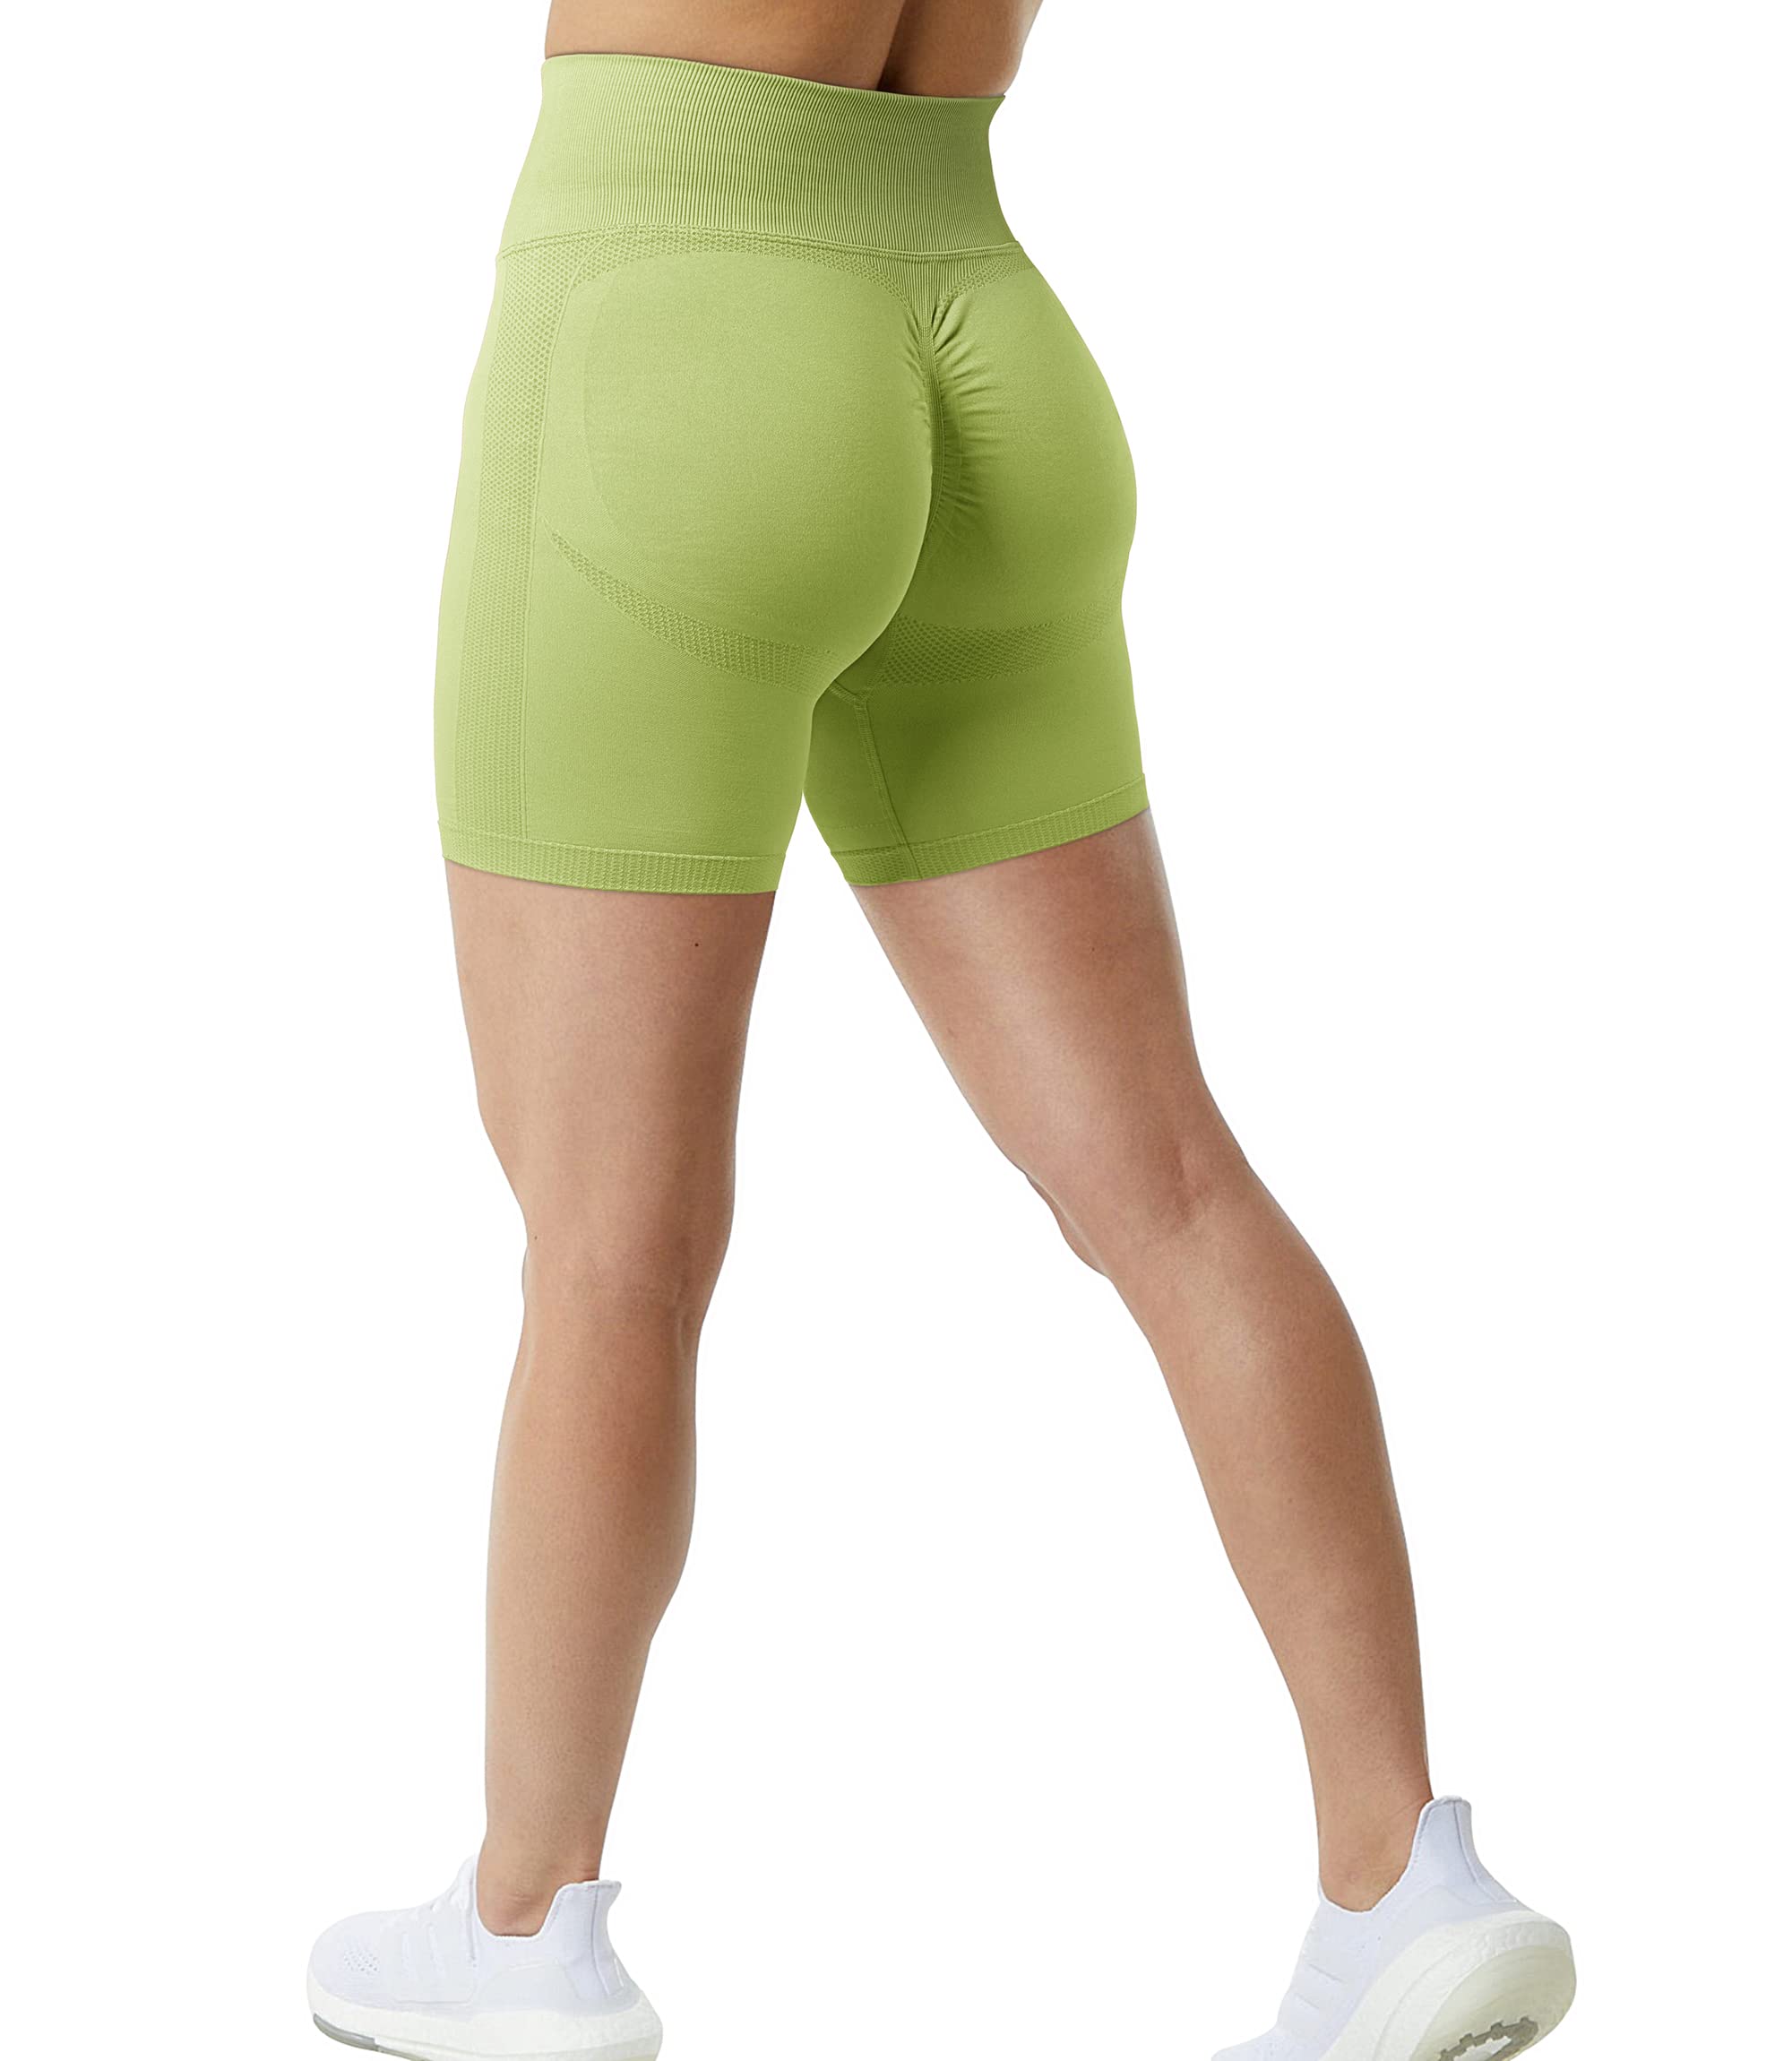 Buy Scrunch Butt Lifting Shorts for Women Workout Gym Smile